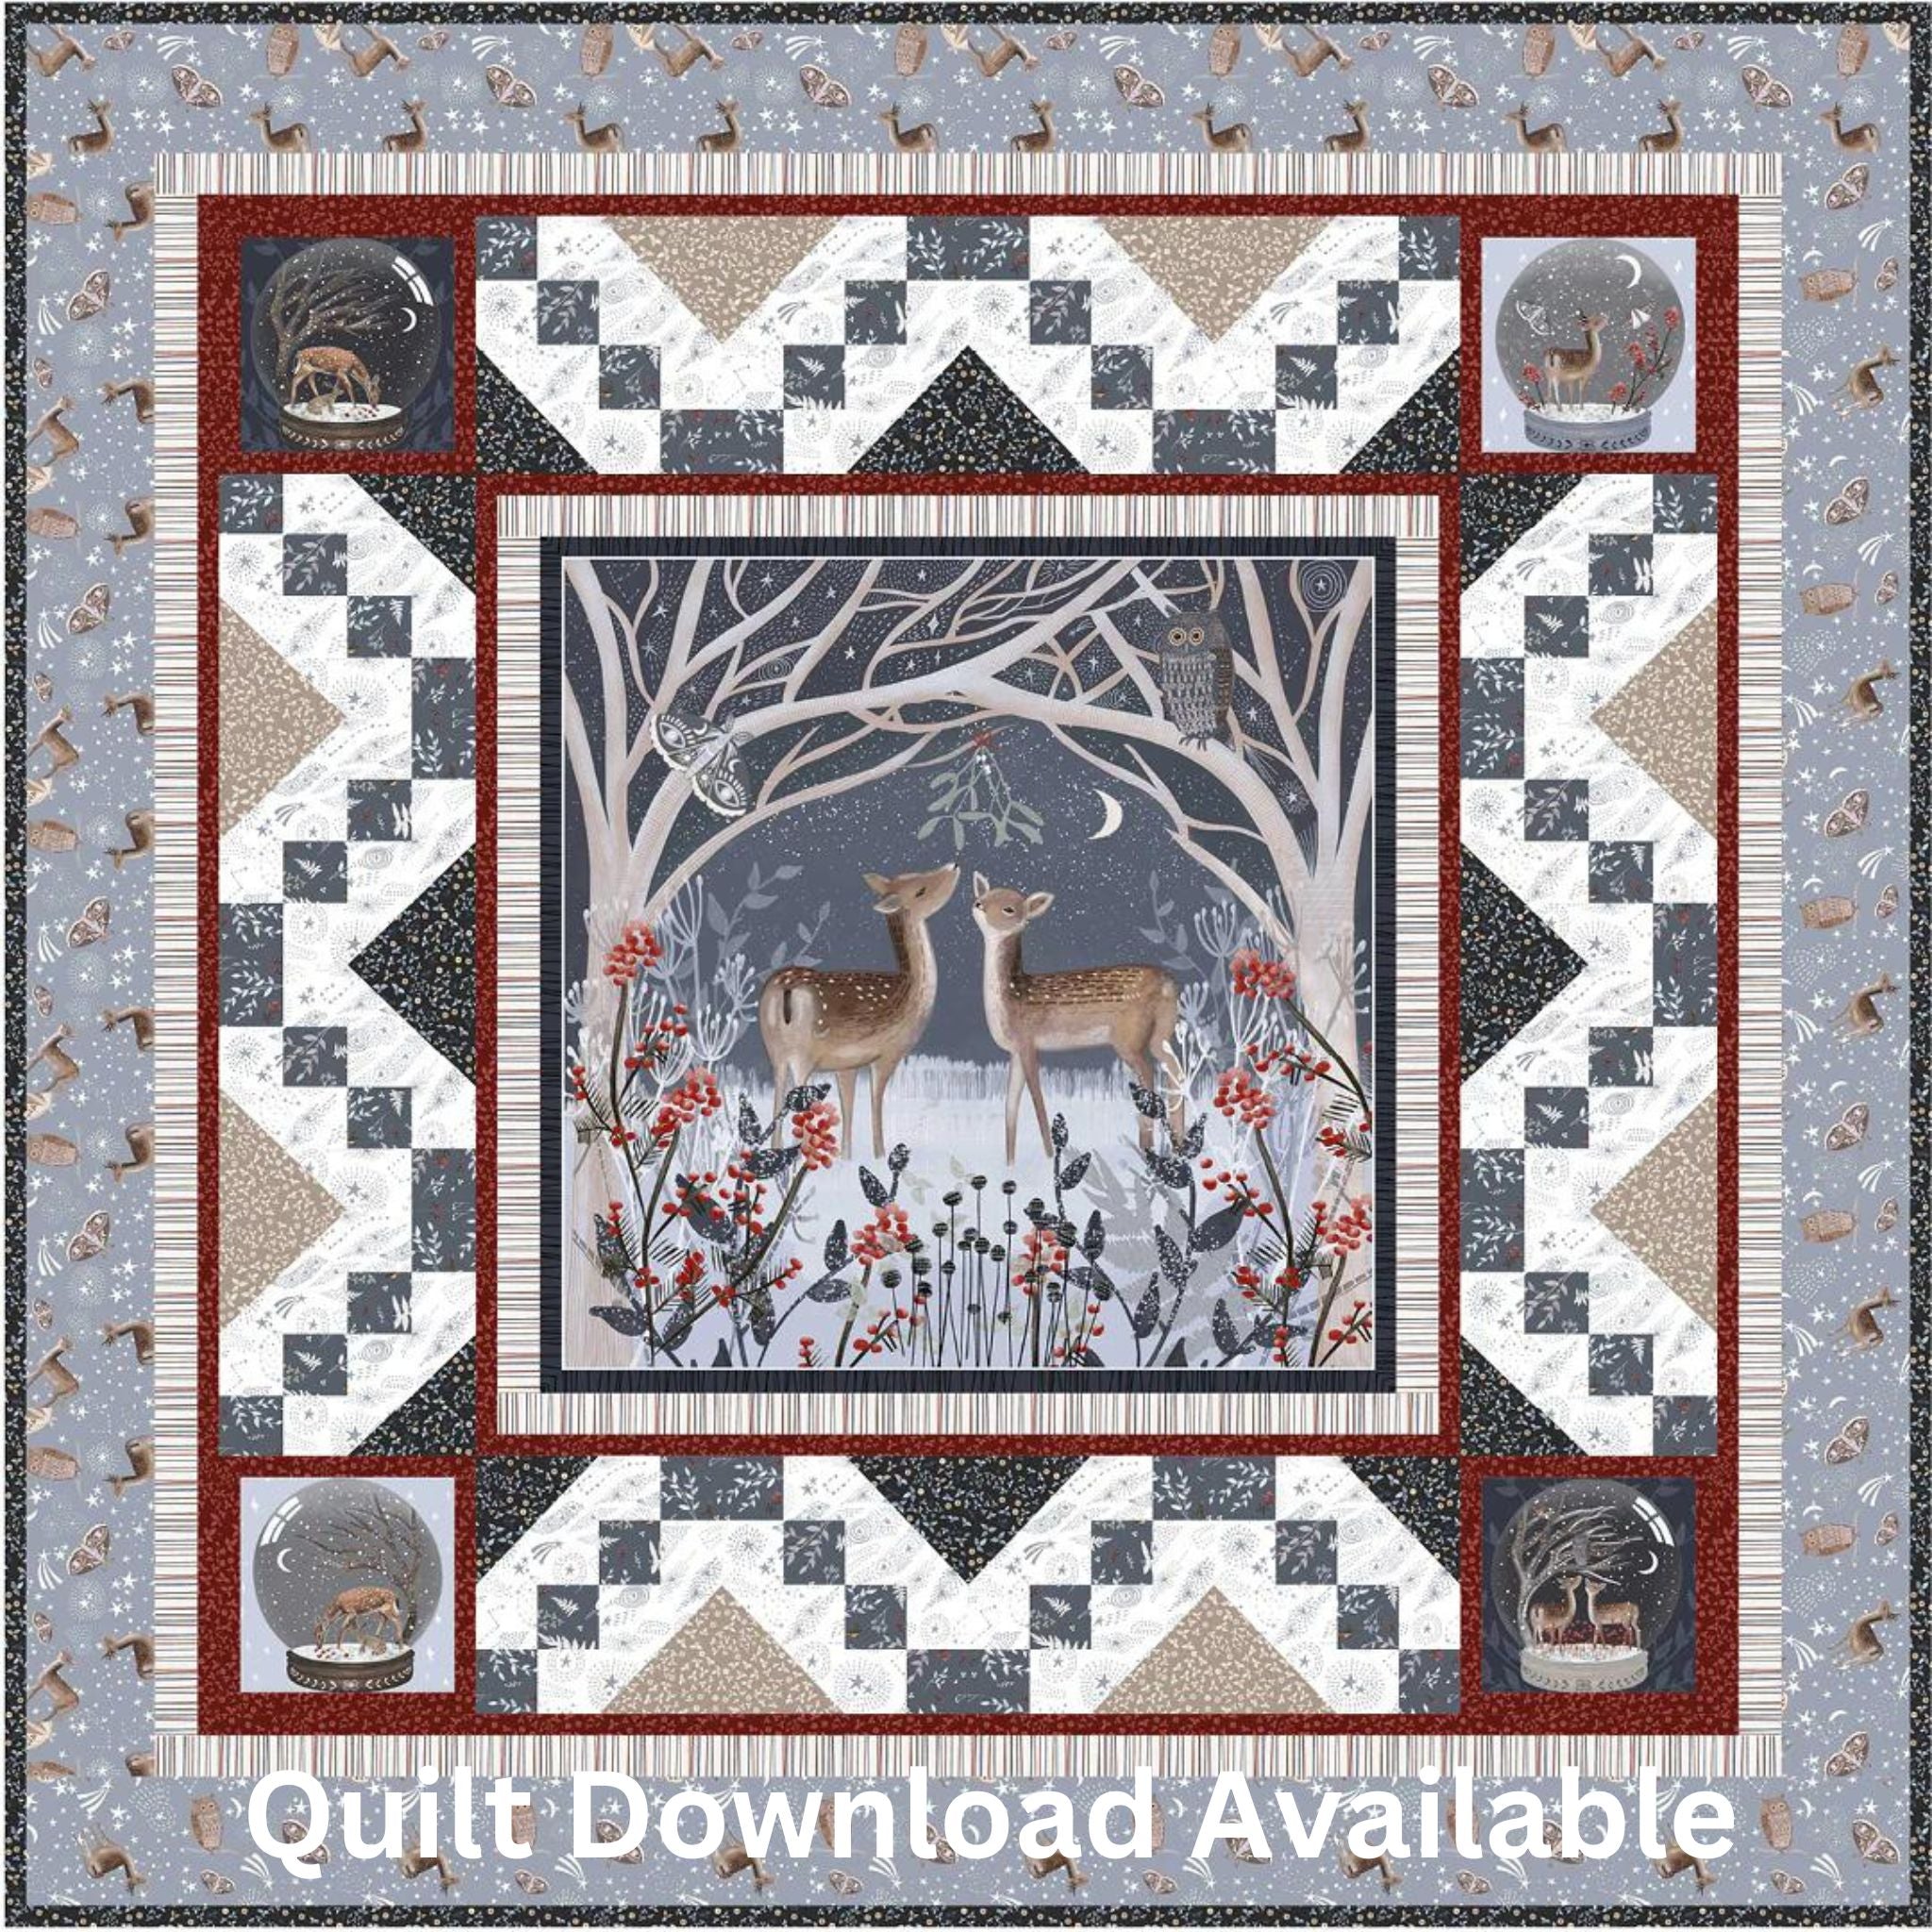 Quilt download available - contact us